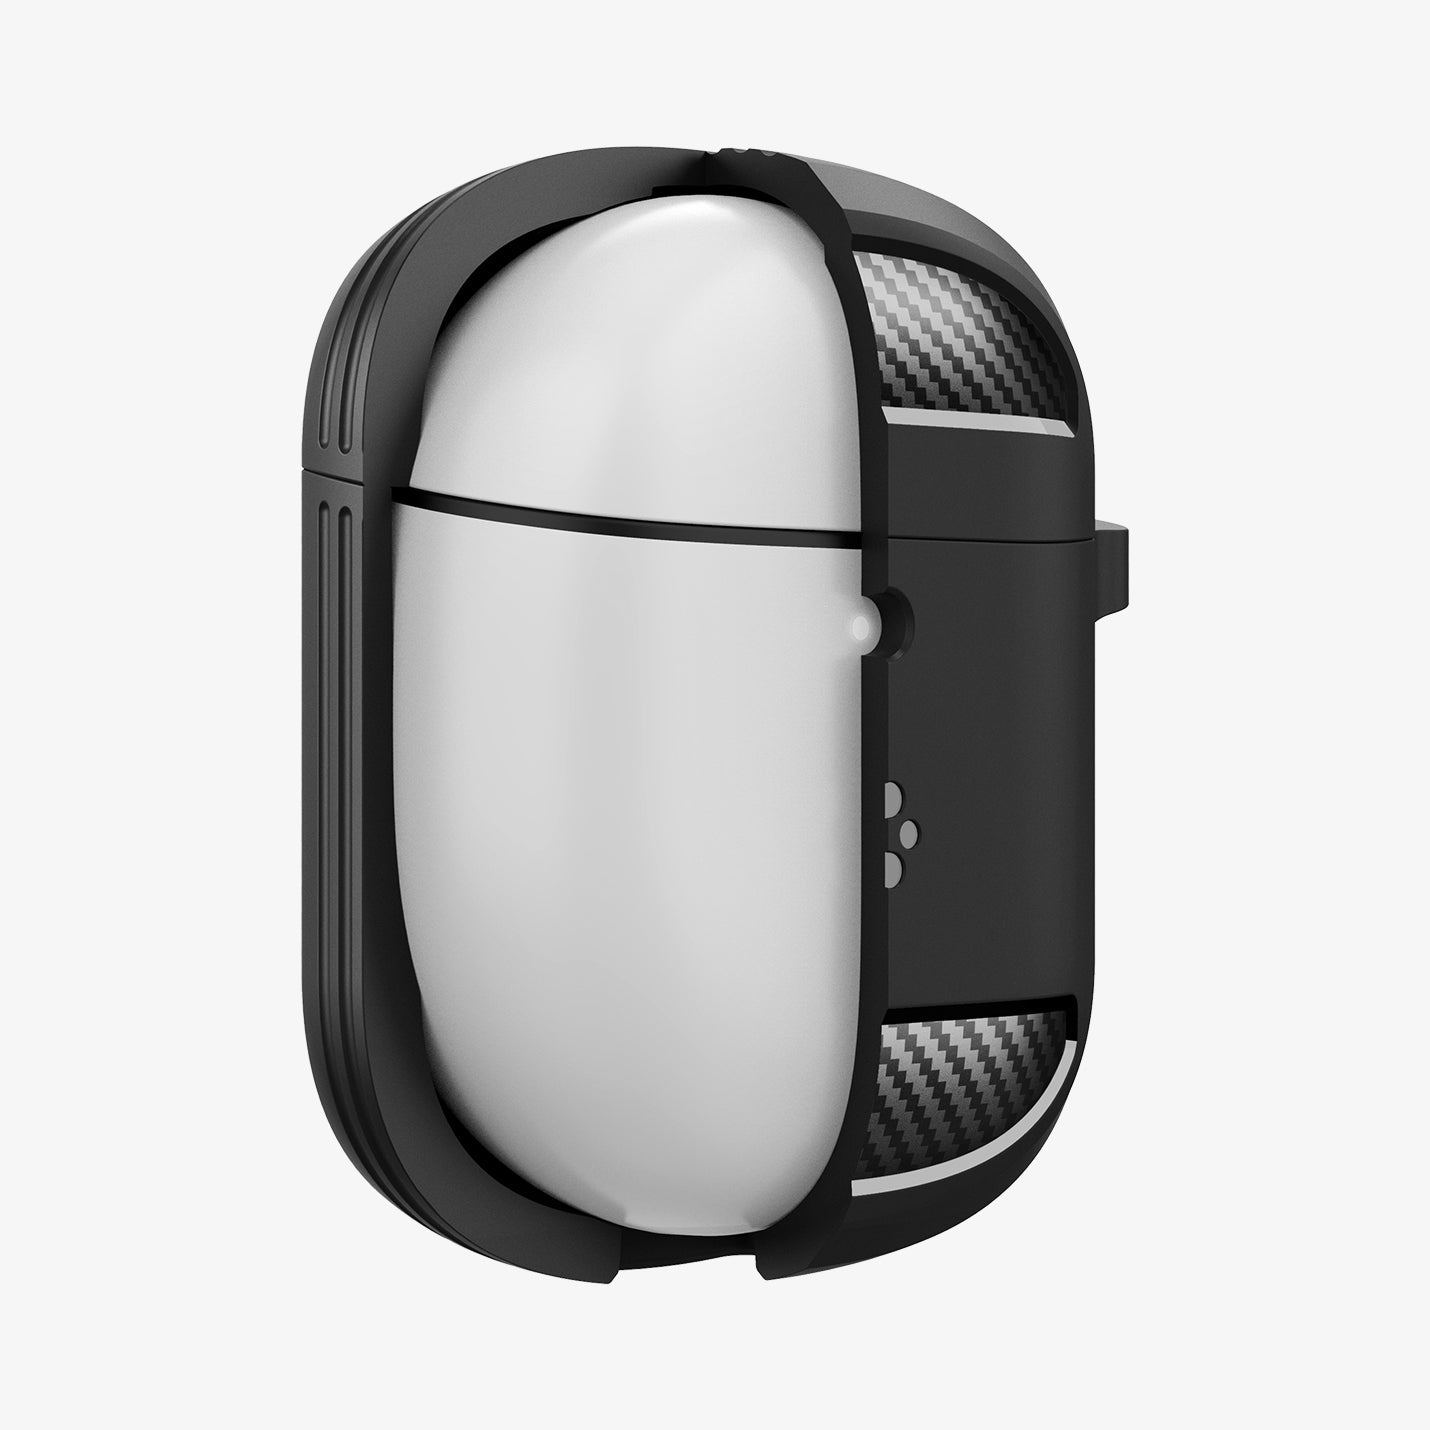 ACS05133 - Pixel Buds Pro Case Rugged Armor in matte black showing the front and side with half cut away to expose inside